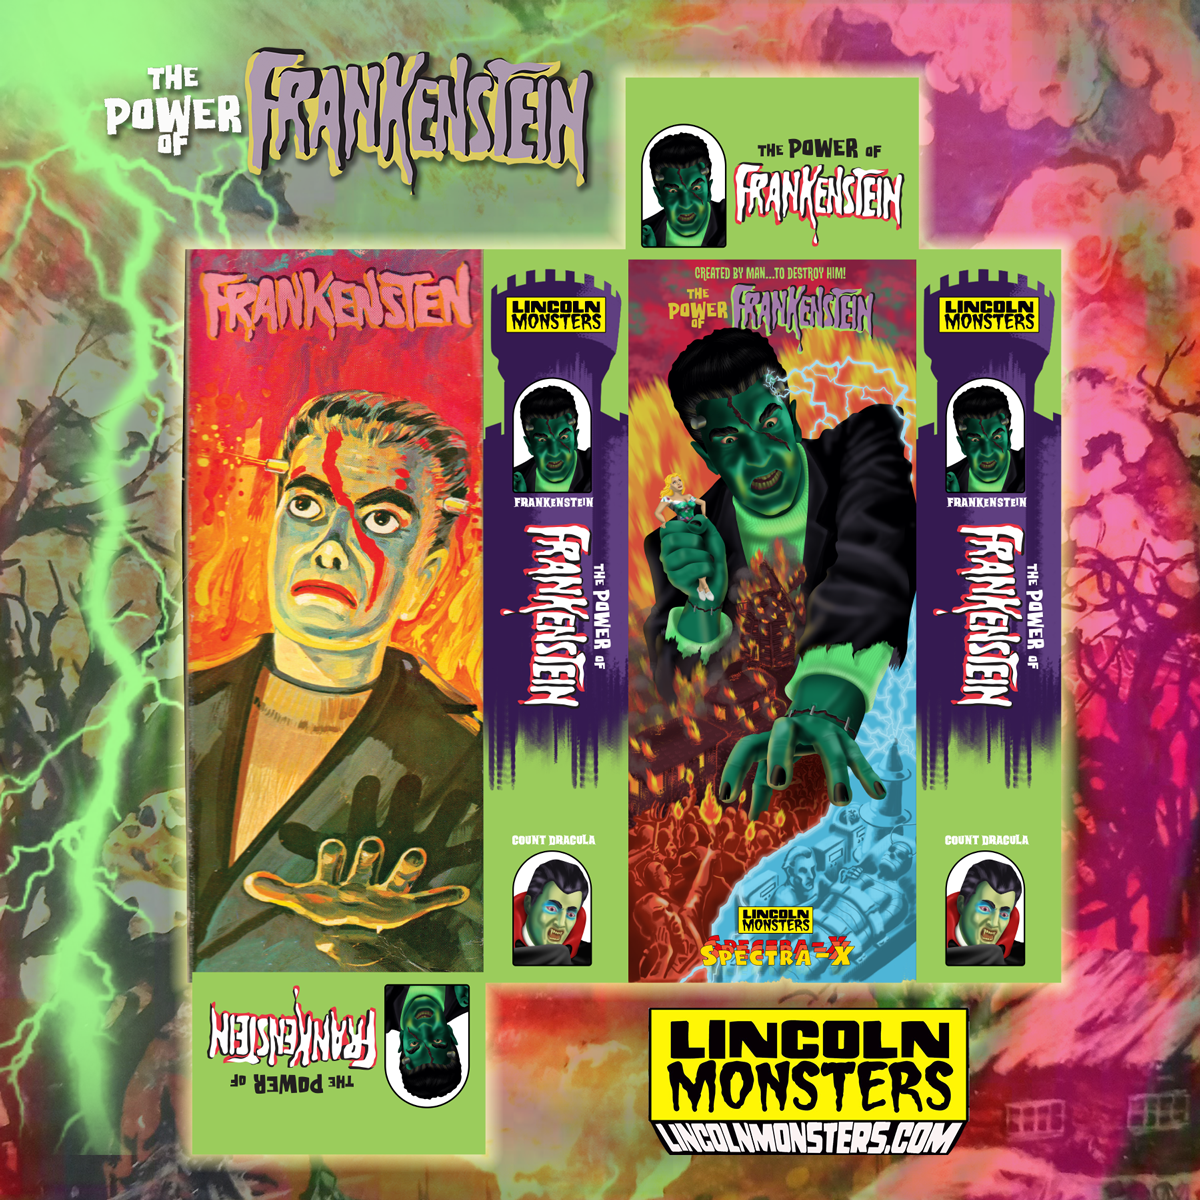 Lincoln Monsters Packaging Reveal “The Power of Frankenstein”